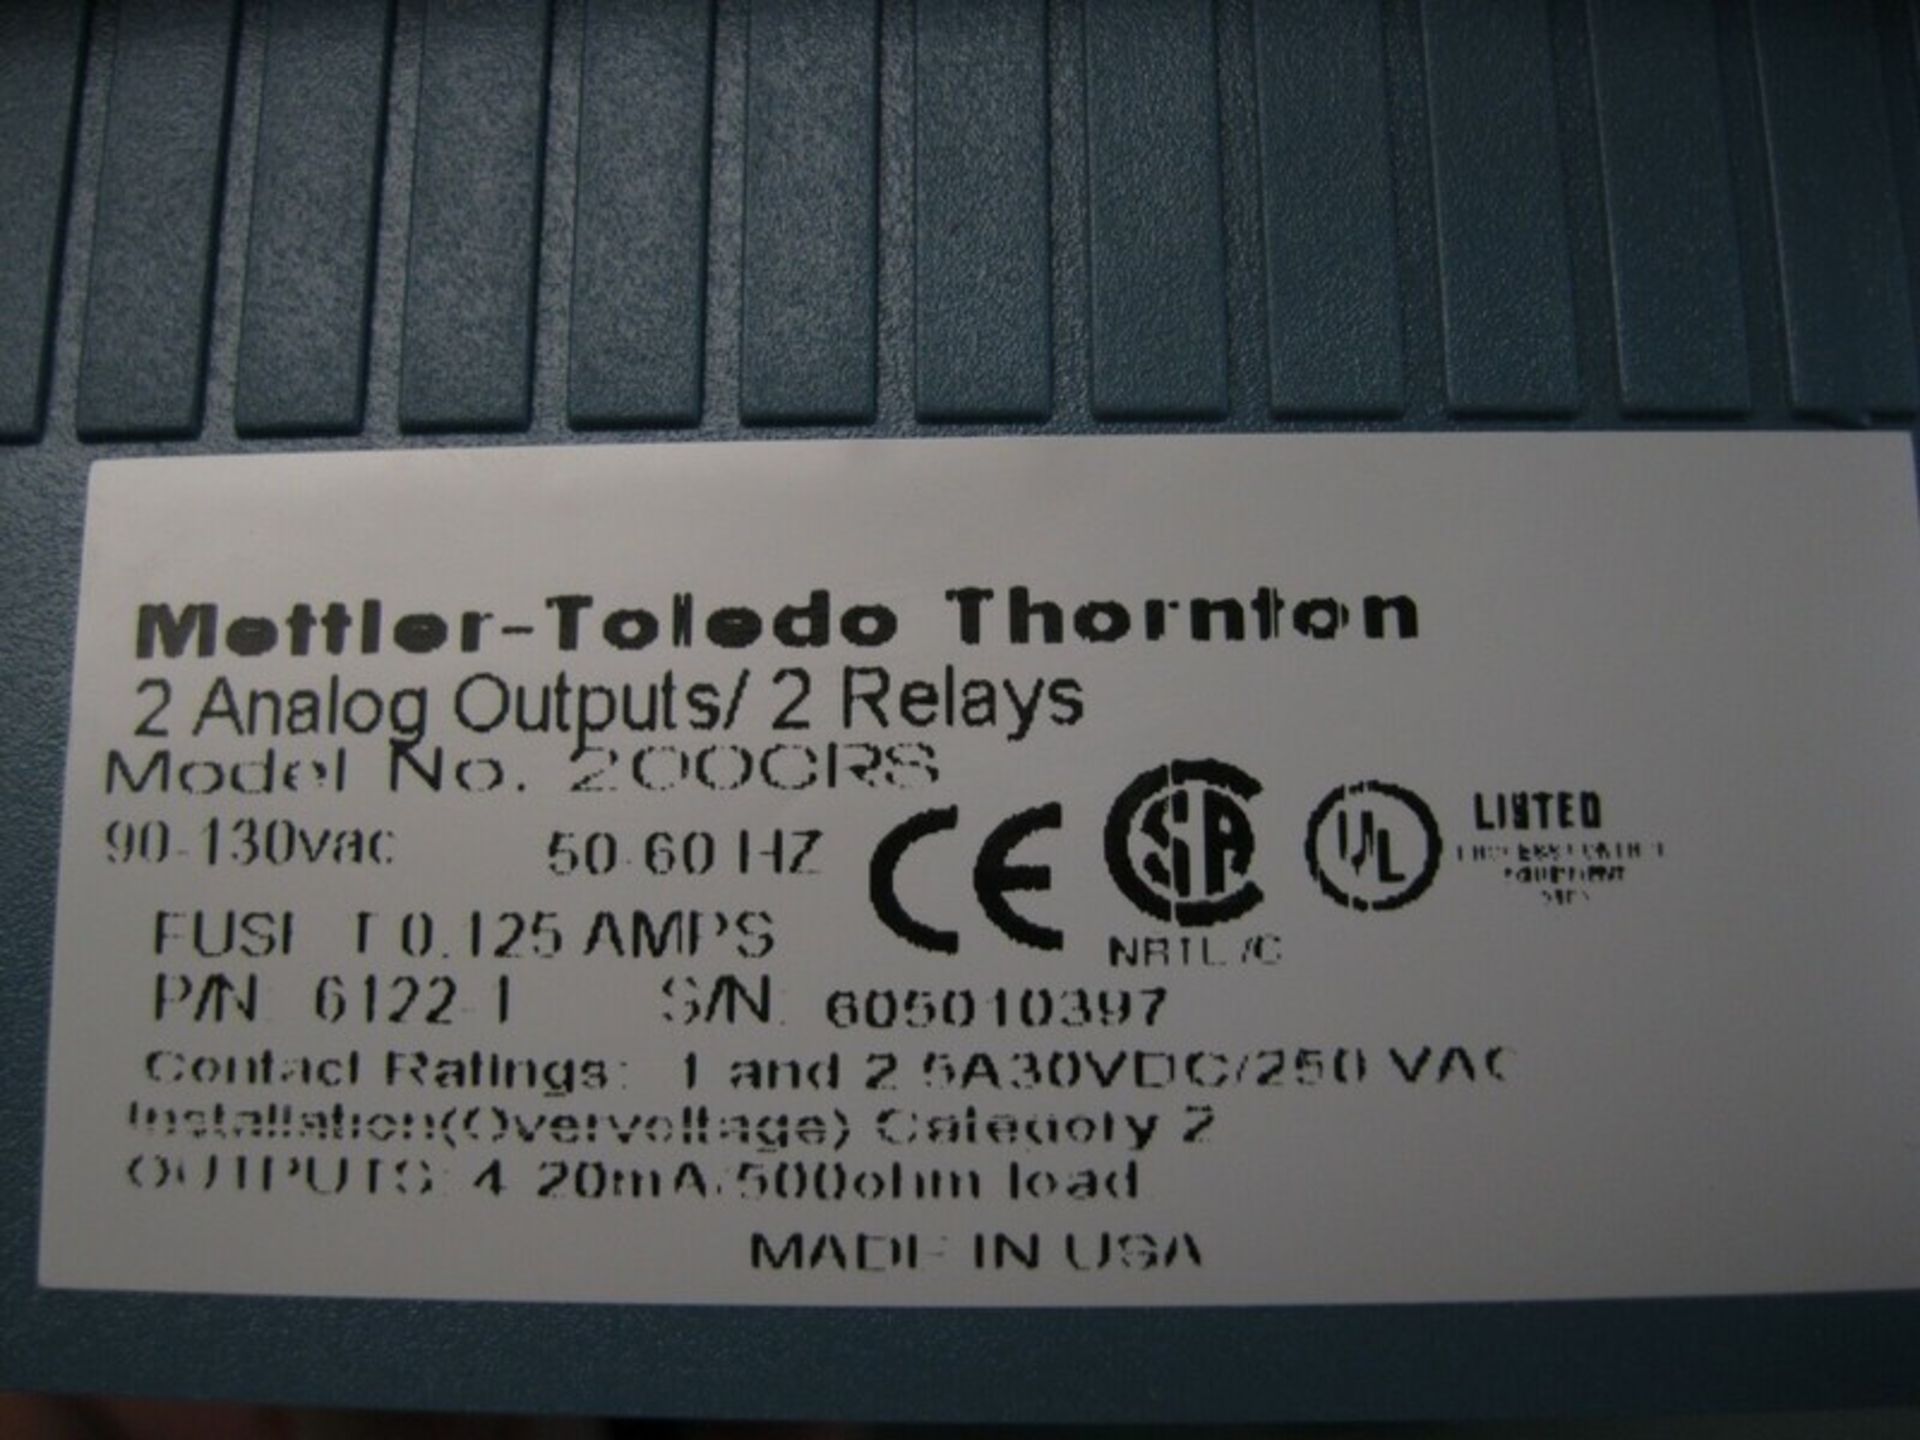 Mettler Toledo Thornton 200CRS Conductivity/Resistivity Meter (NOTE: Packing and Palletizing Can Be - Image 5 of 5